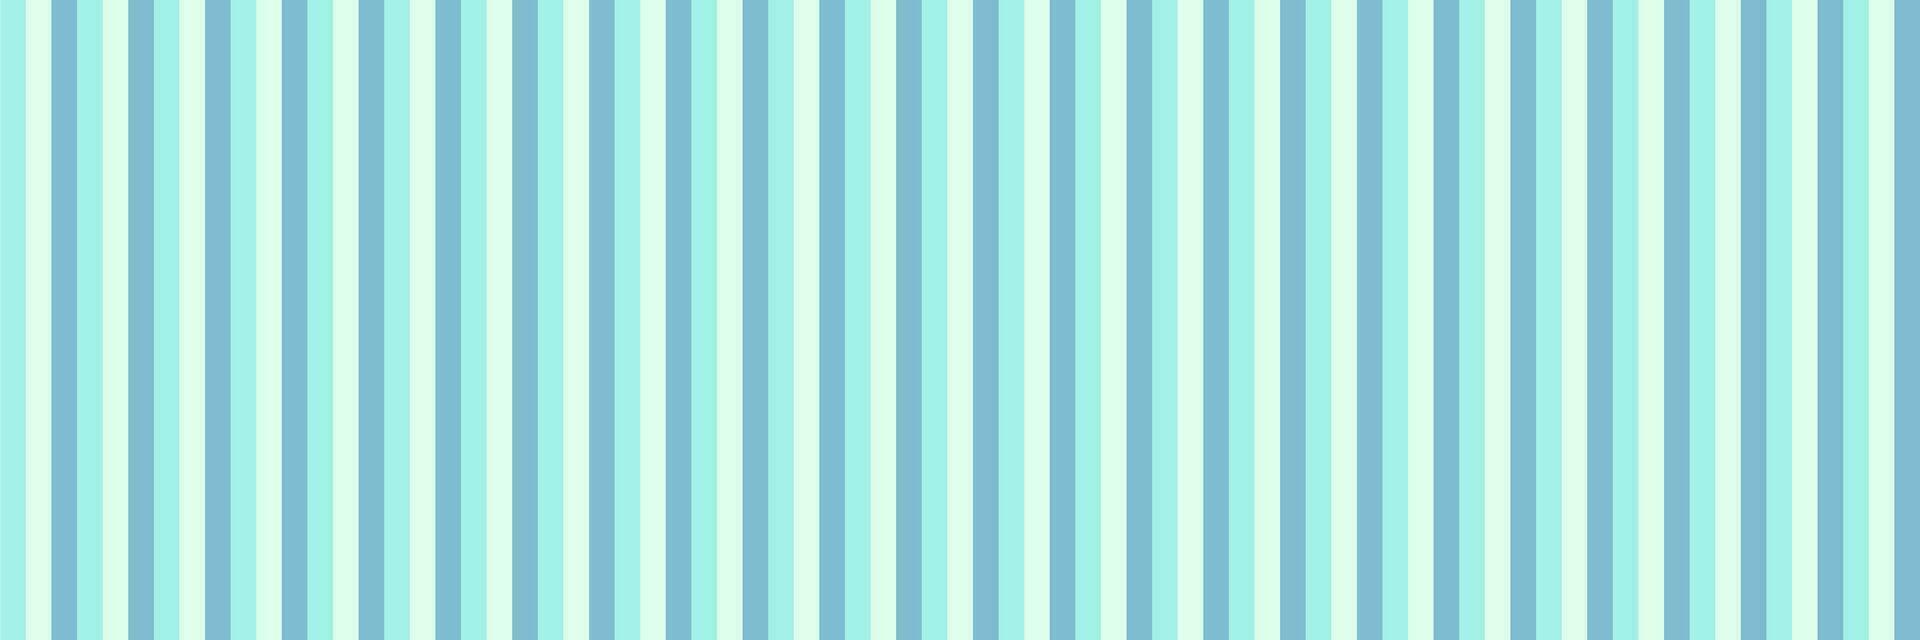 abstract background blue color with lines pattern. vector for banner, greeting card, web, poster.